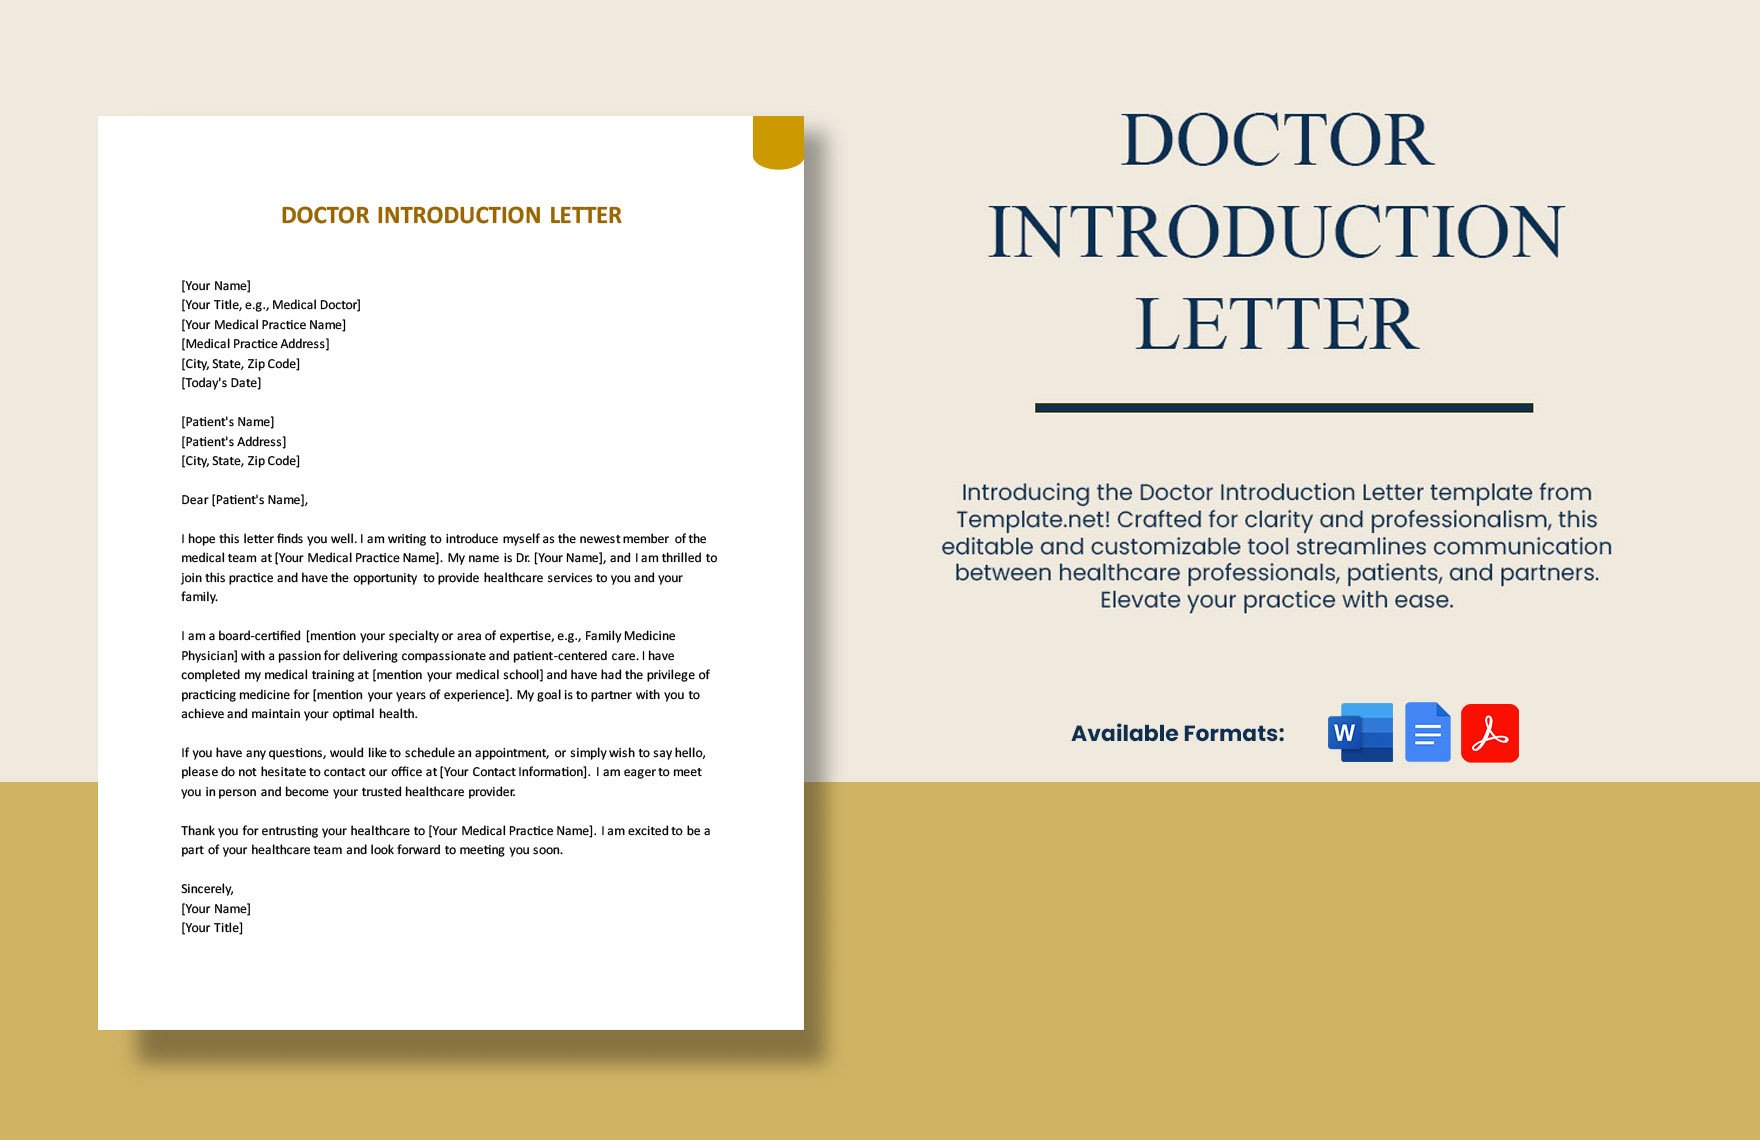 Doctor Introduction Letter in Word, Google Docs, PDF